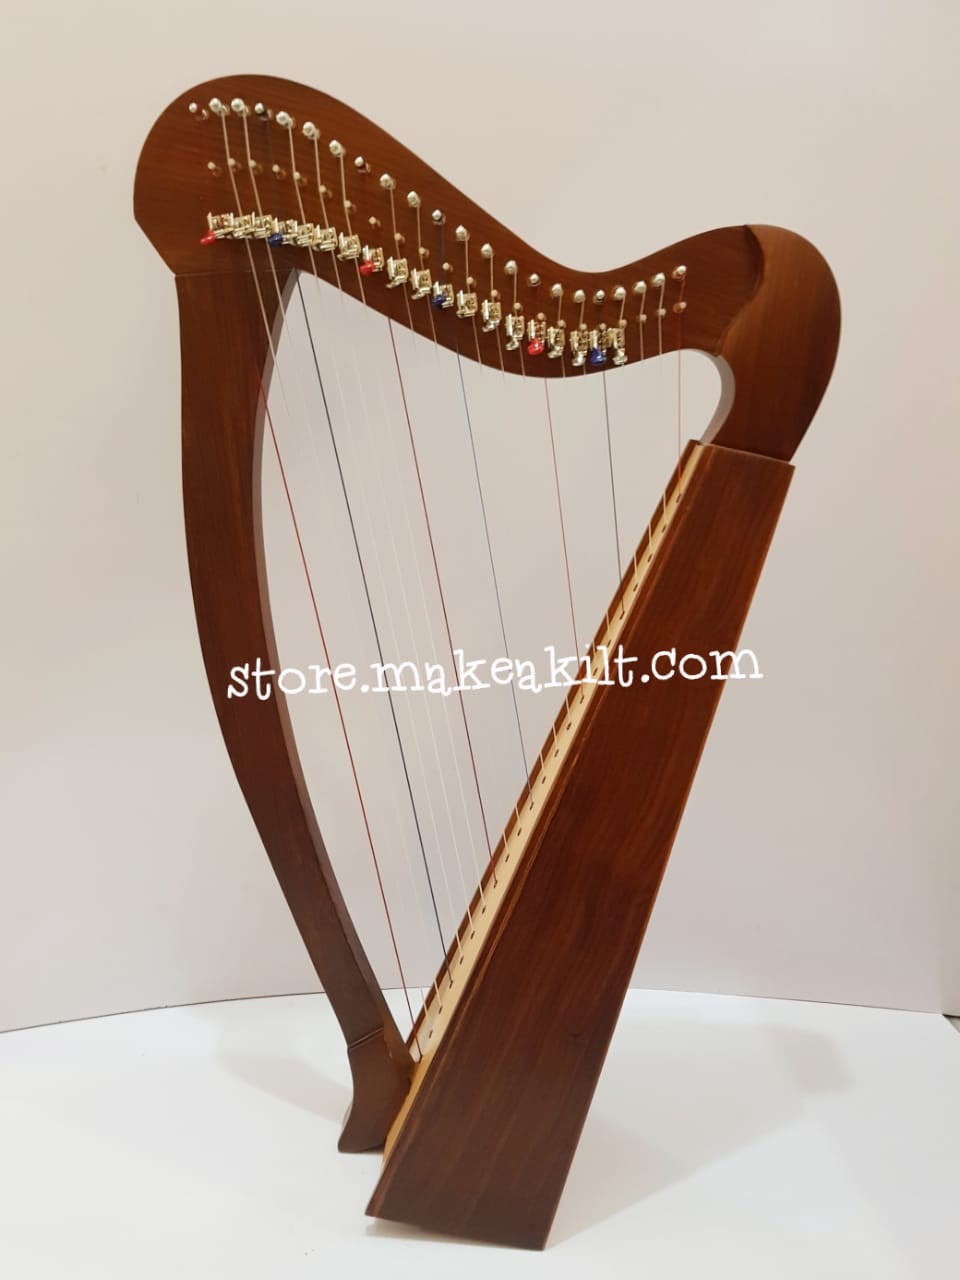 22 Strings Harp With free Bag Strings and Tuning Key